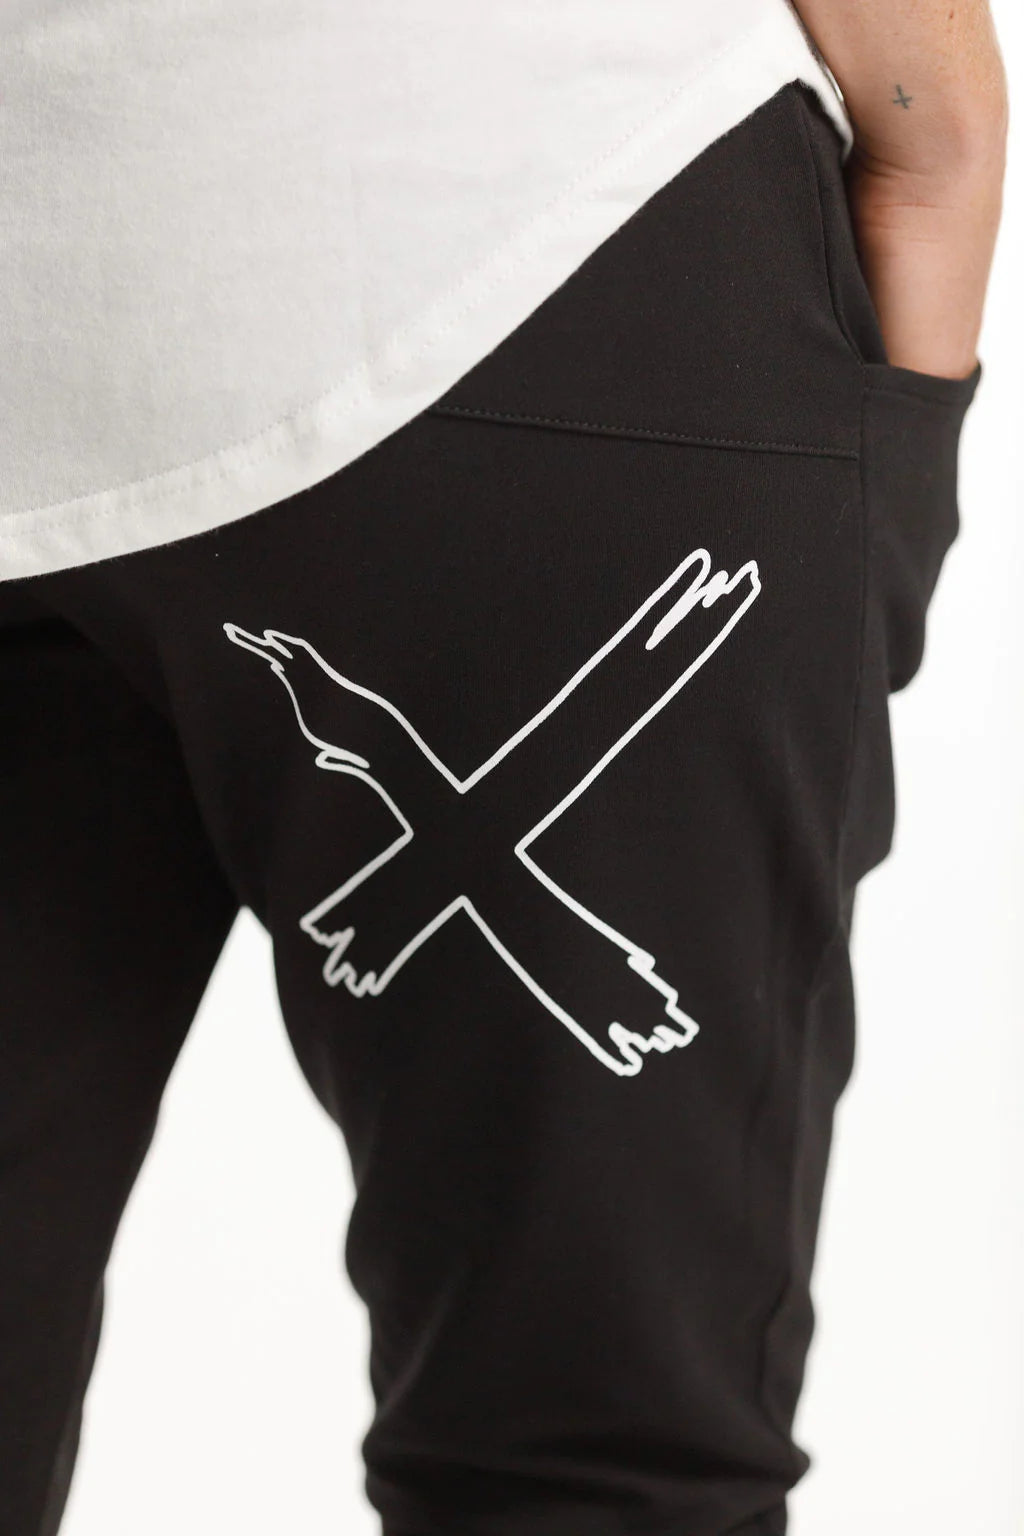 Home-Lee Apartment Pants - Black with White X Outline Harlos